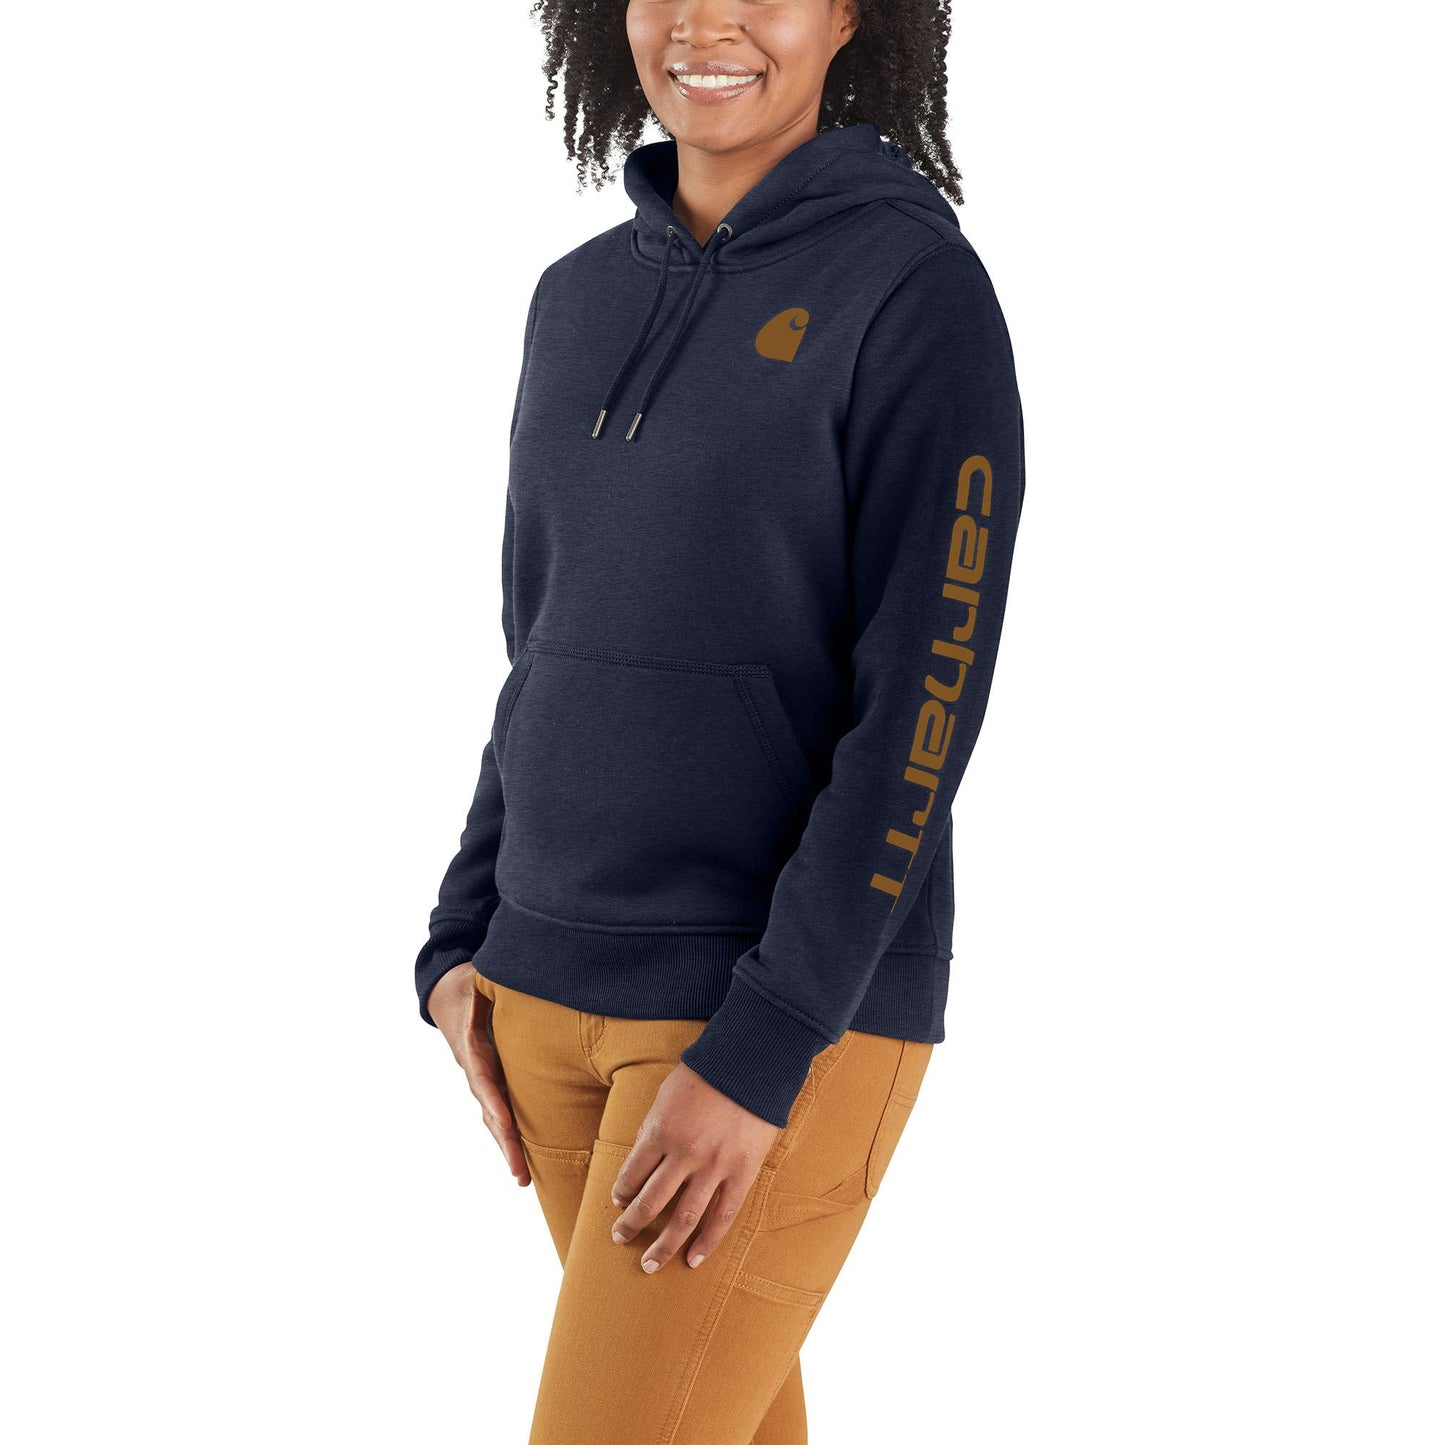 Women's Relaxed Fit Midweight Hoodie